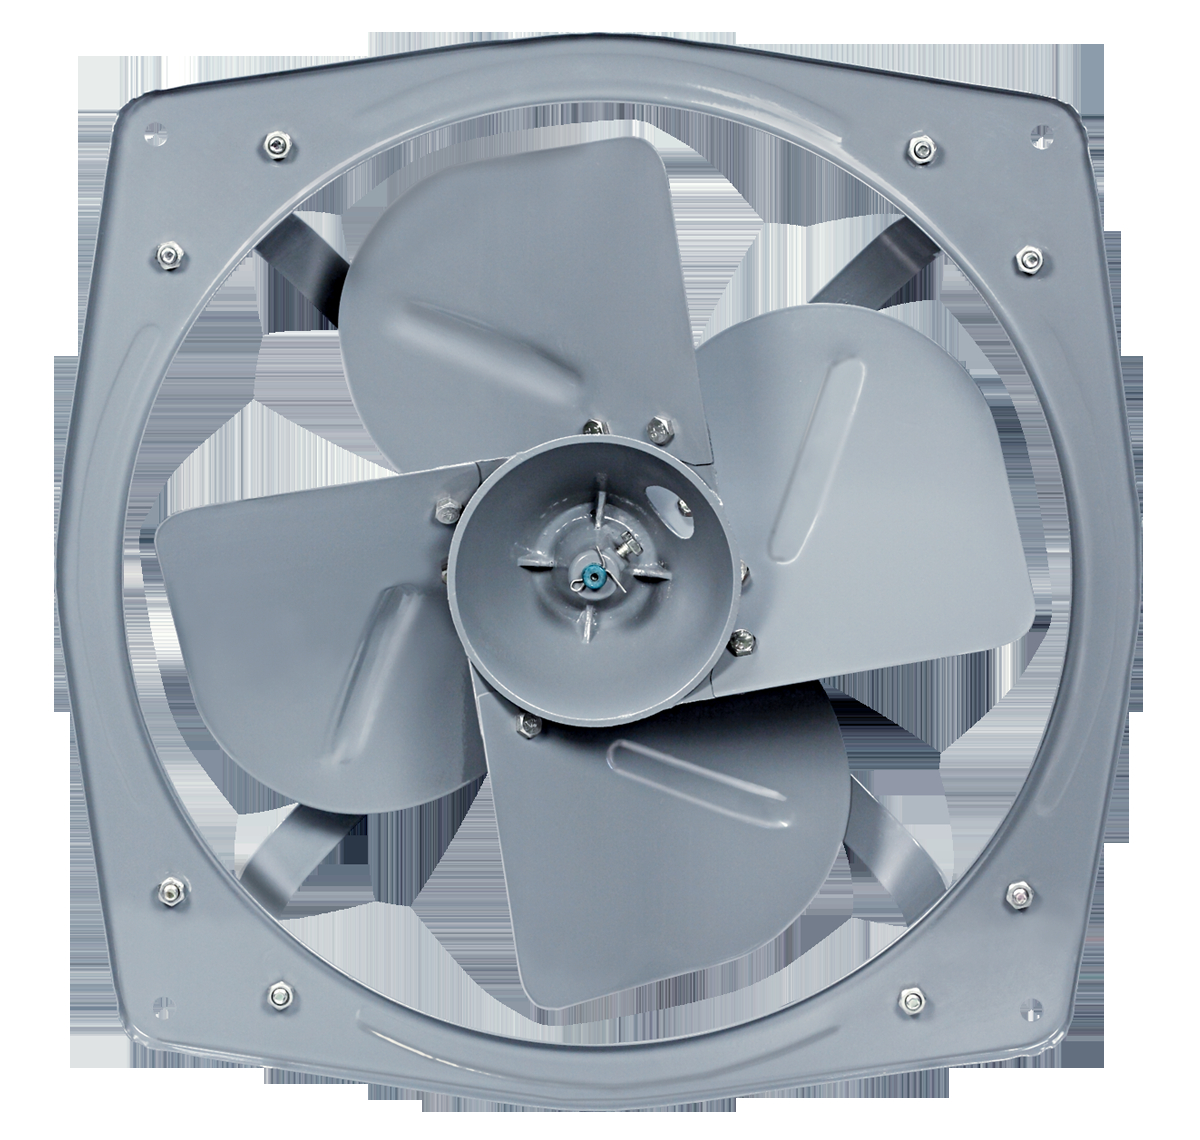 Havells Heavy Duty Exhaust Fan Turboforce 1400 Rpm Havells pertaining to size 1200 X 1140